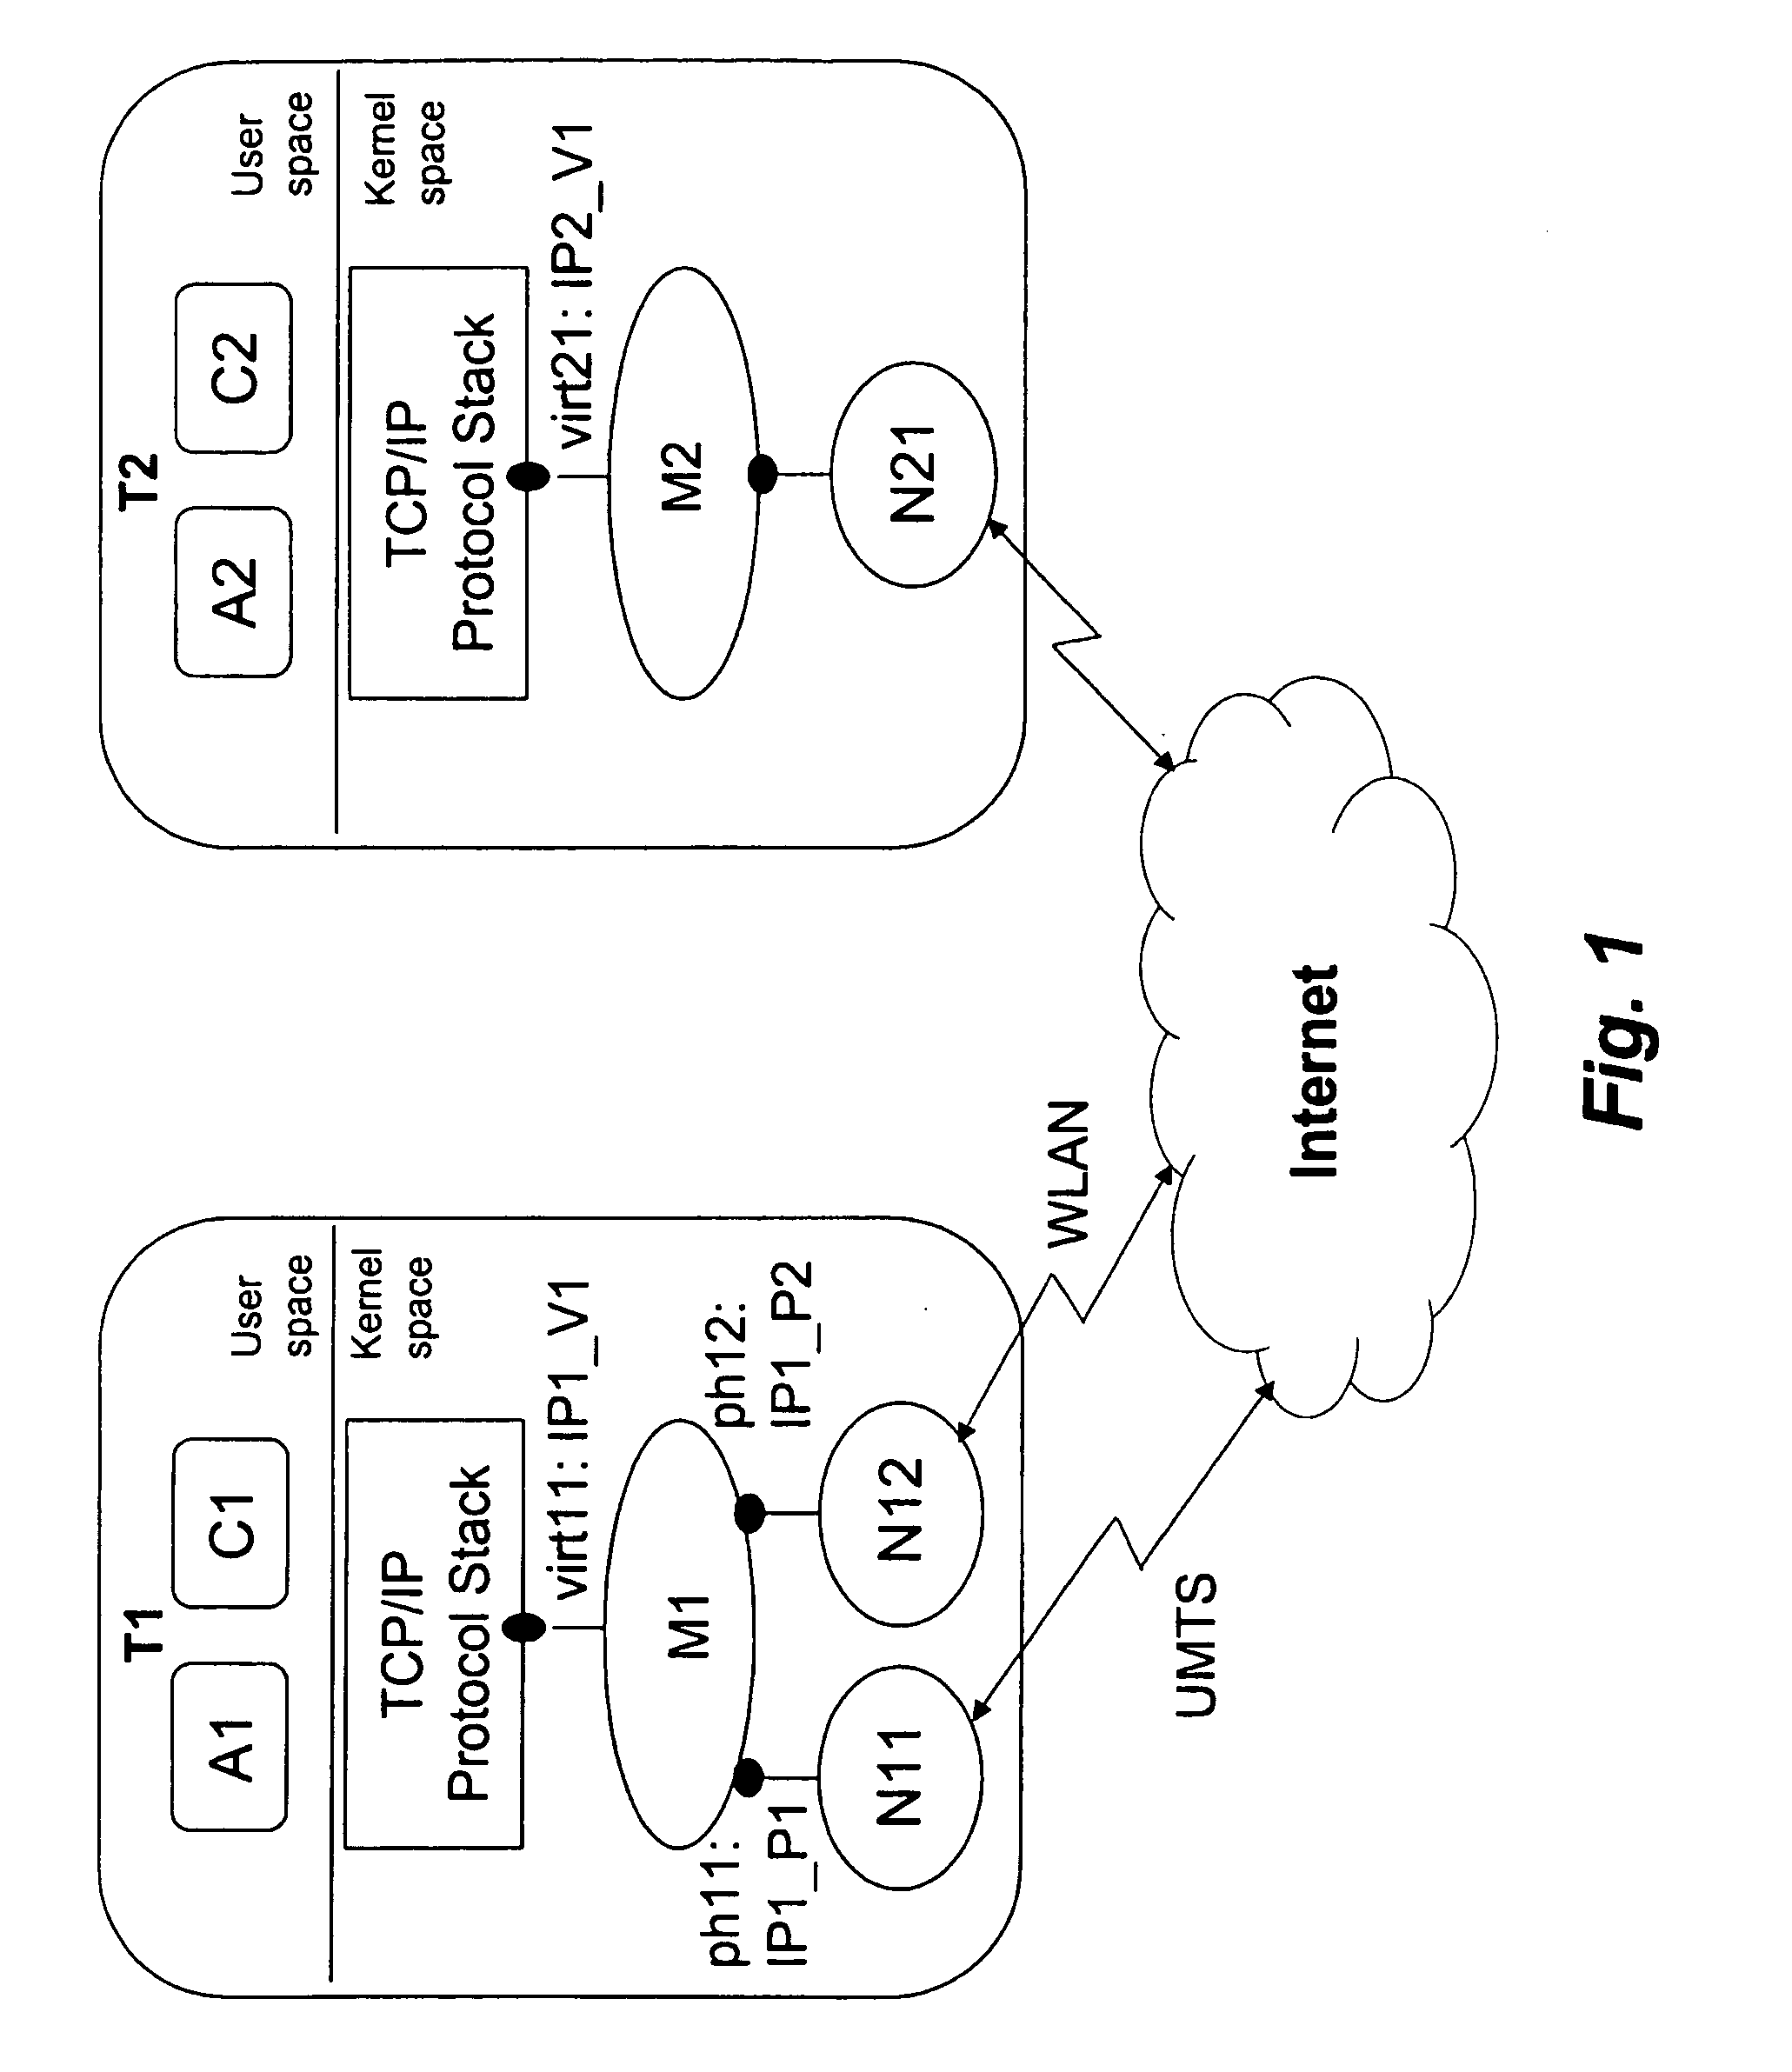 Management of seamless handover between different communication systems in an IP dual-mode terminal